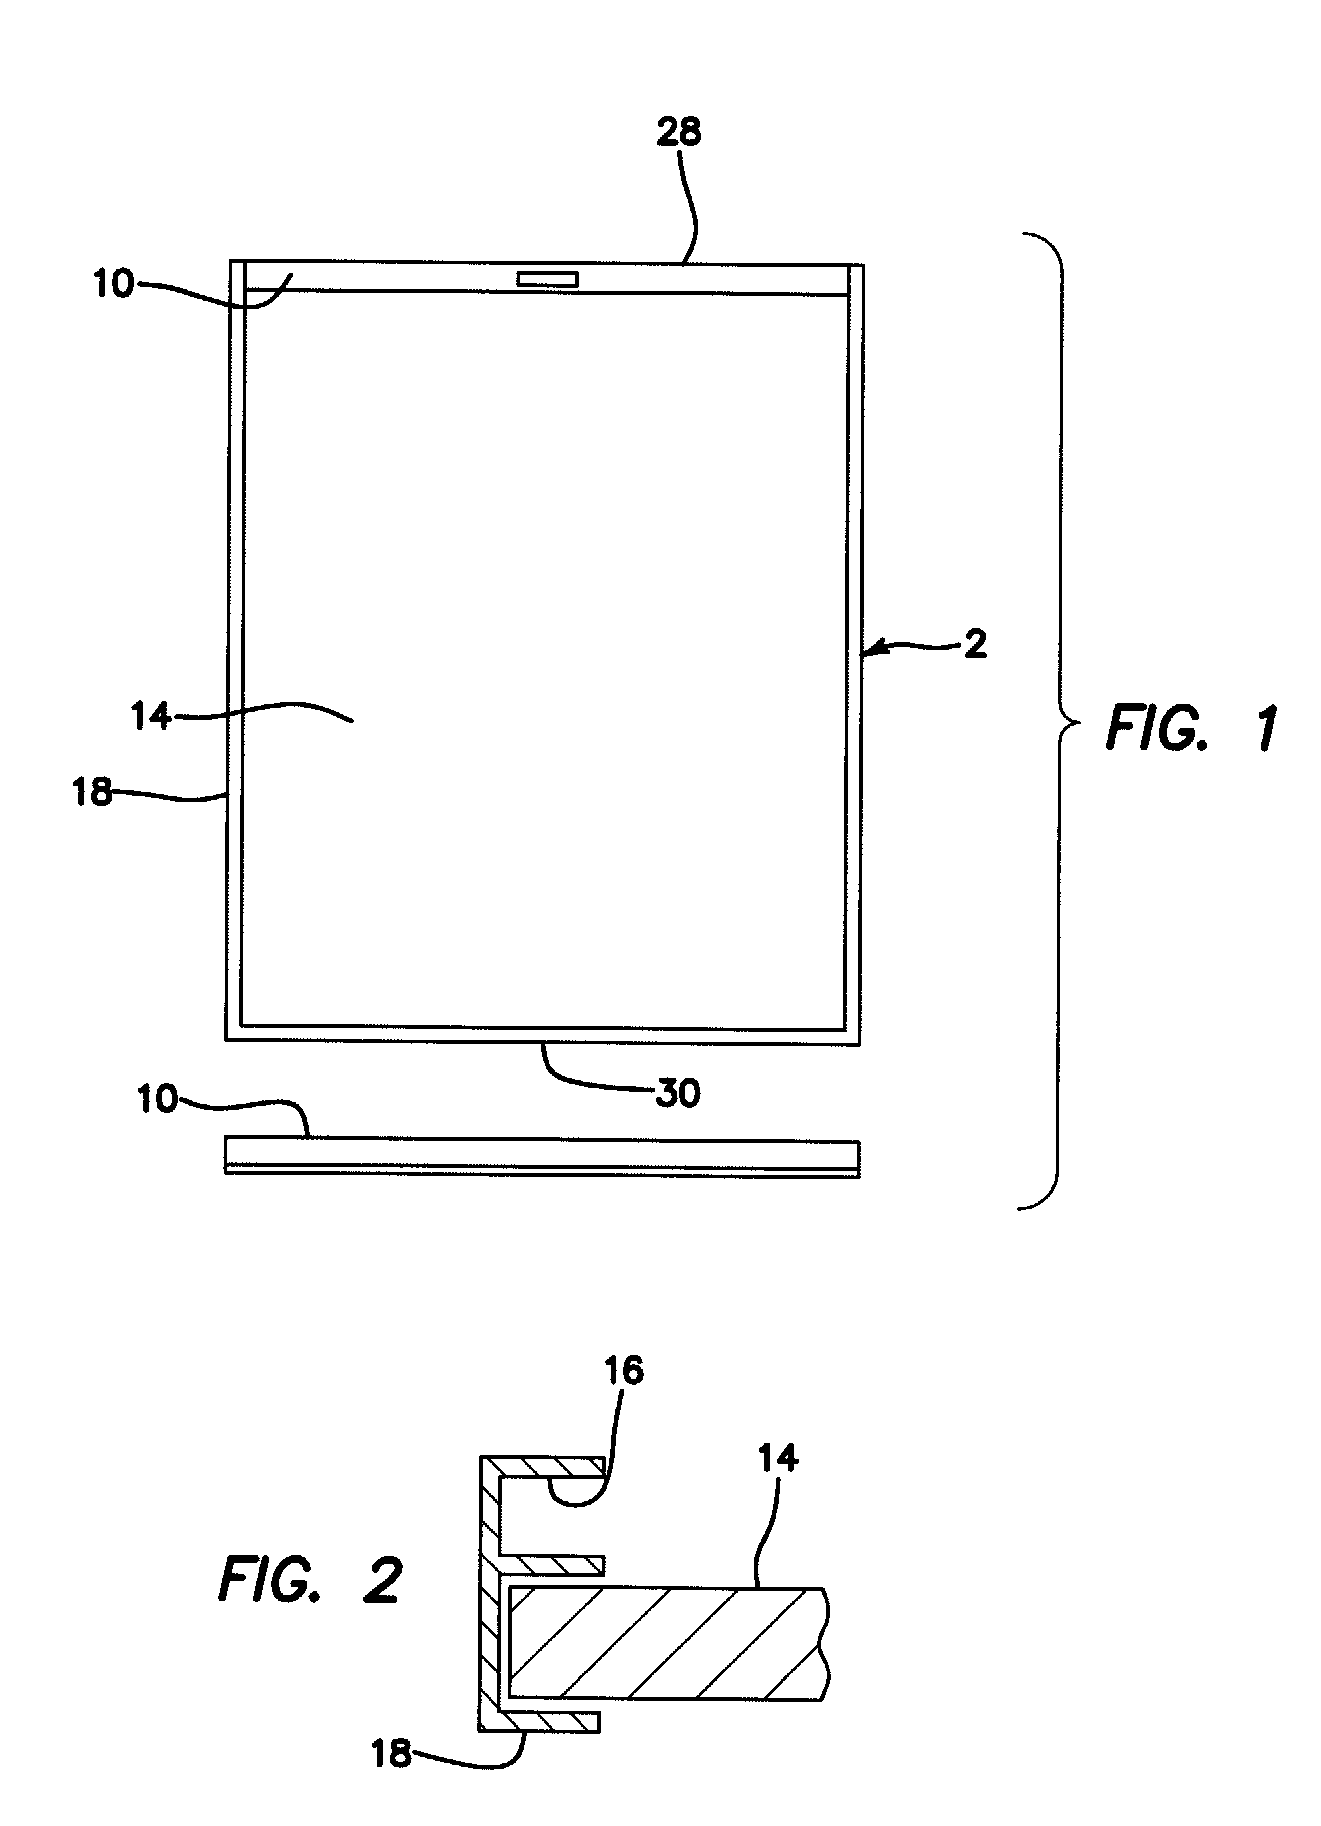 Method and Apparatus for Cleaning A Touch or Display Screen